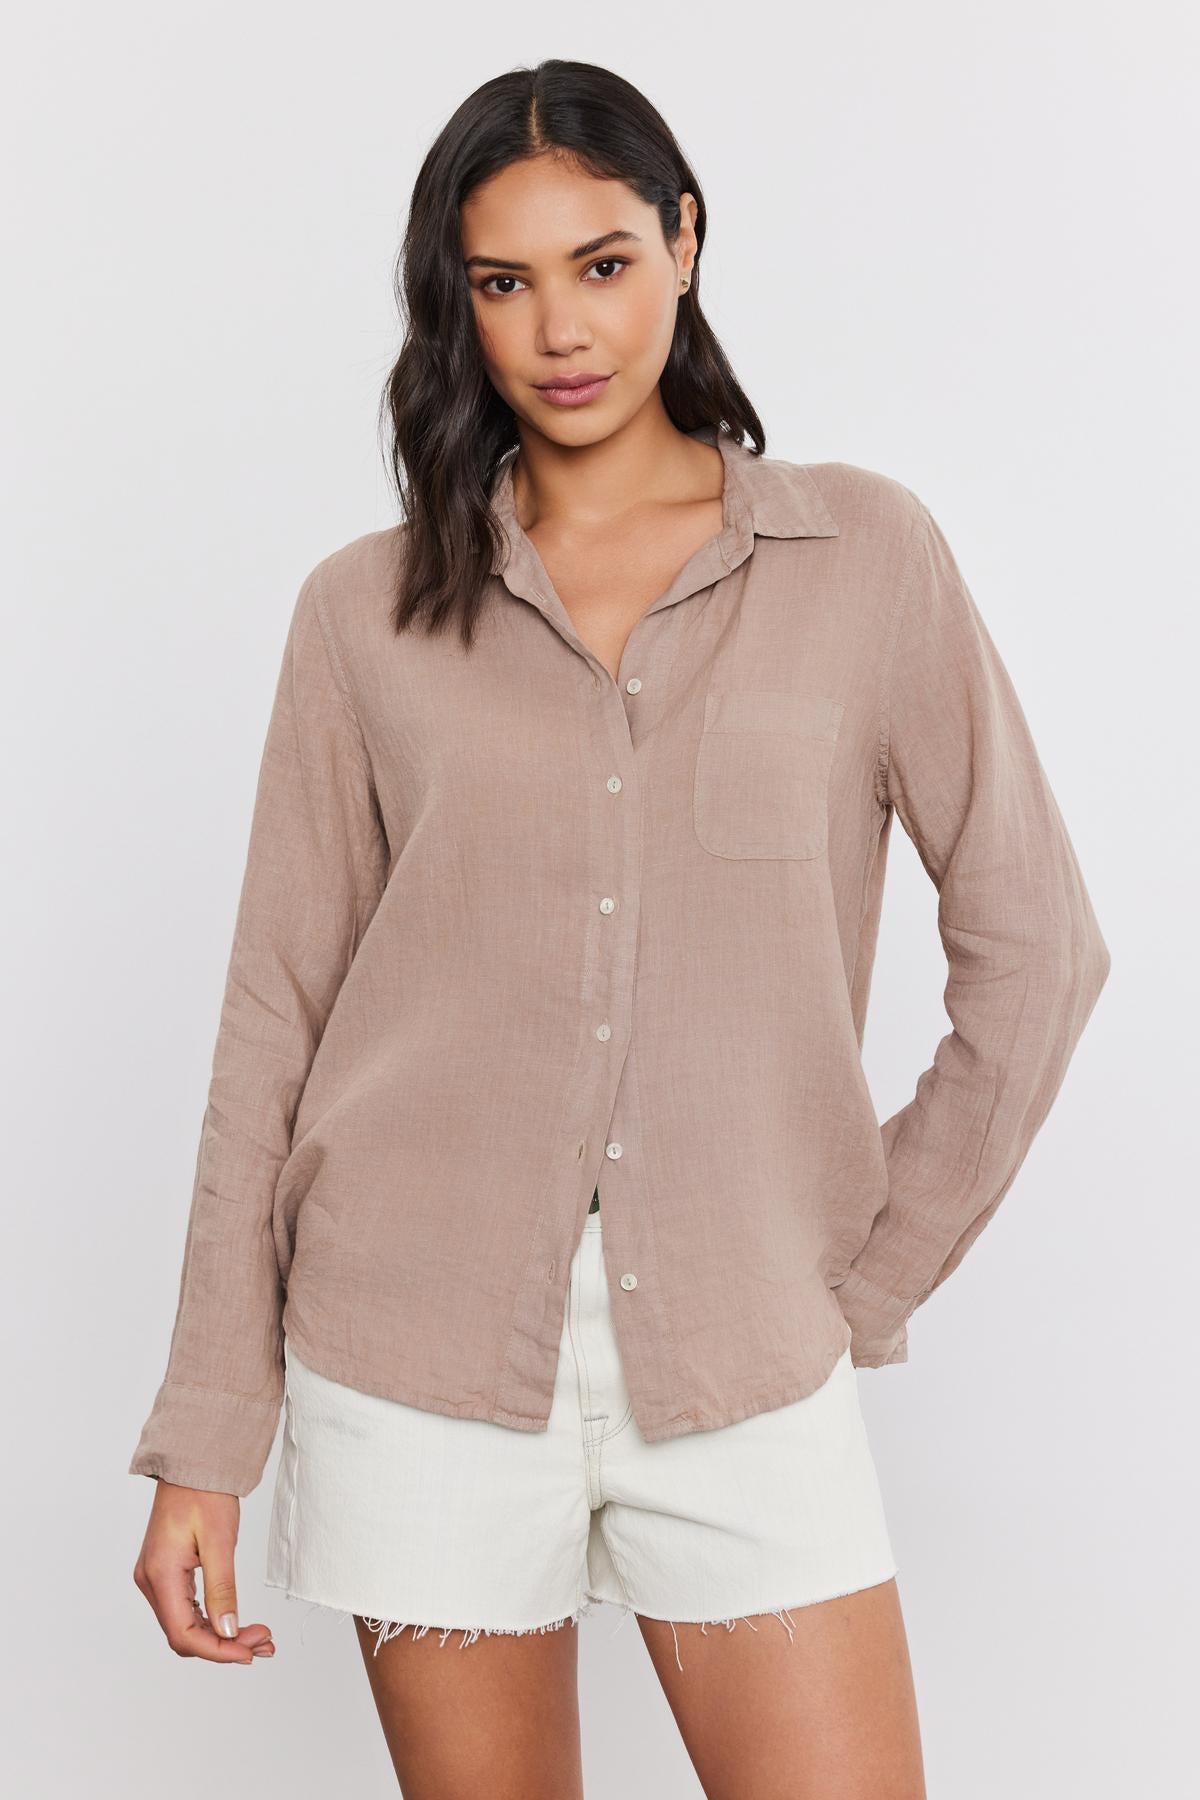 A woman with shoulder-length dark hair wearing a casual beige Velvet by Graham & Spencer Natalia Linen Button-Up Shirt and white frayed shorts, both in a relaxed silhouette.-36752935813313